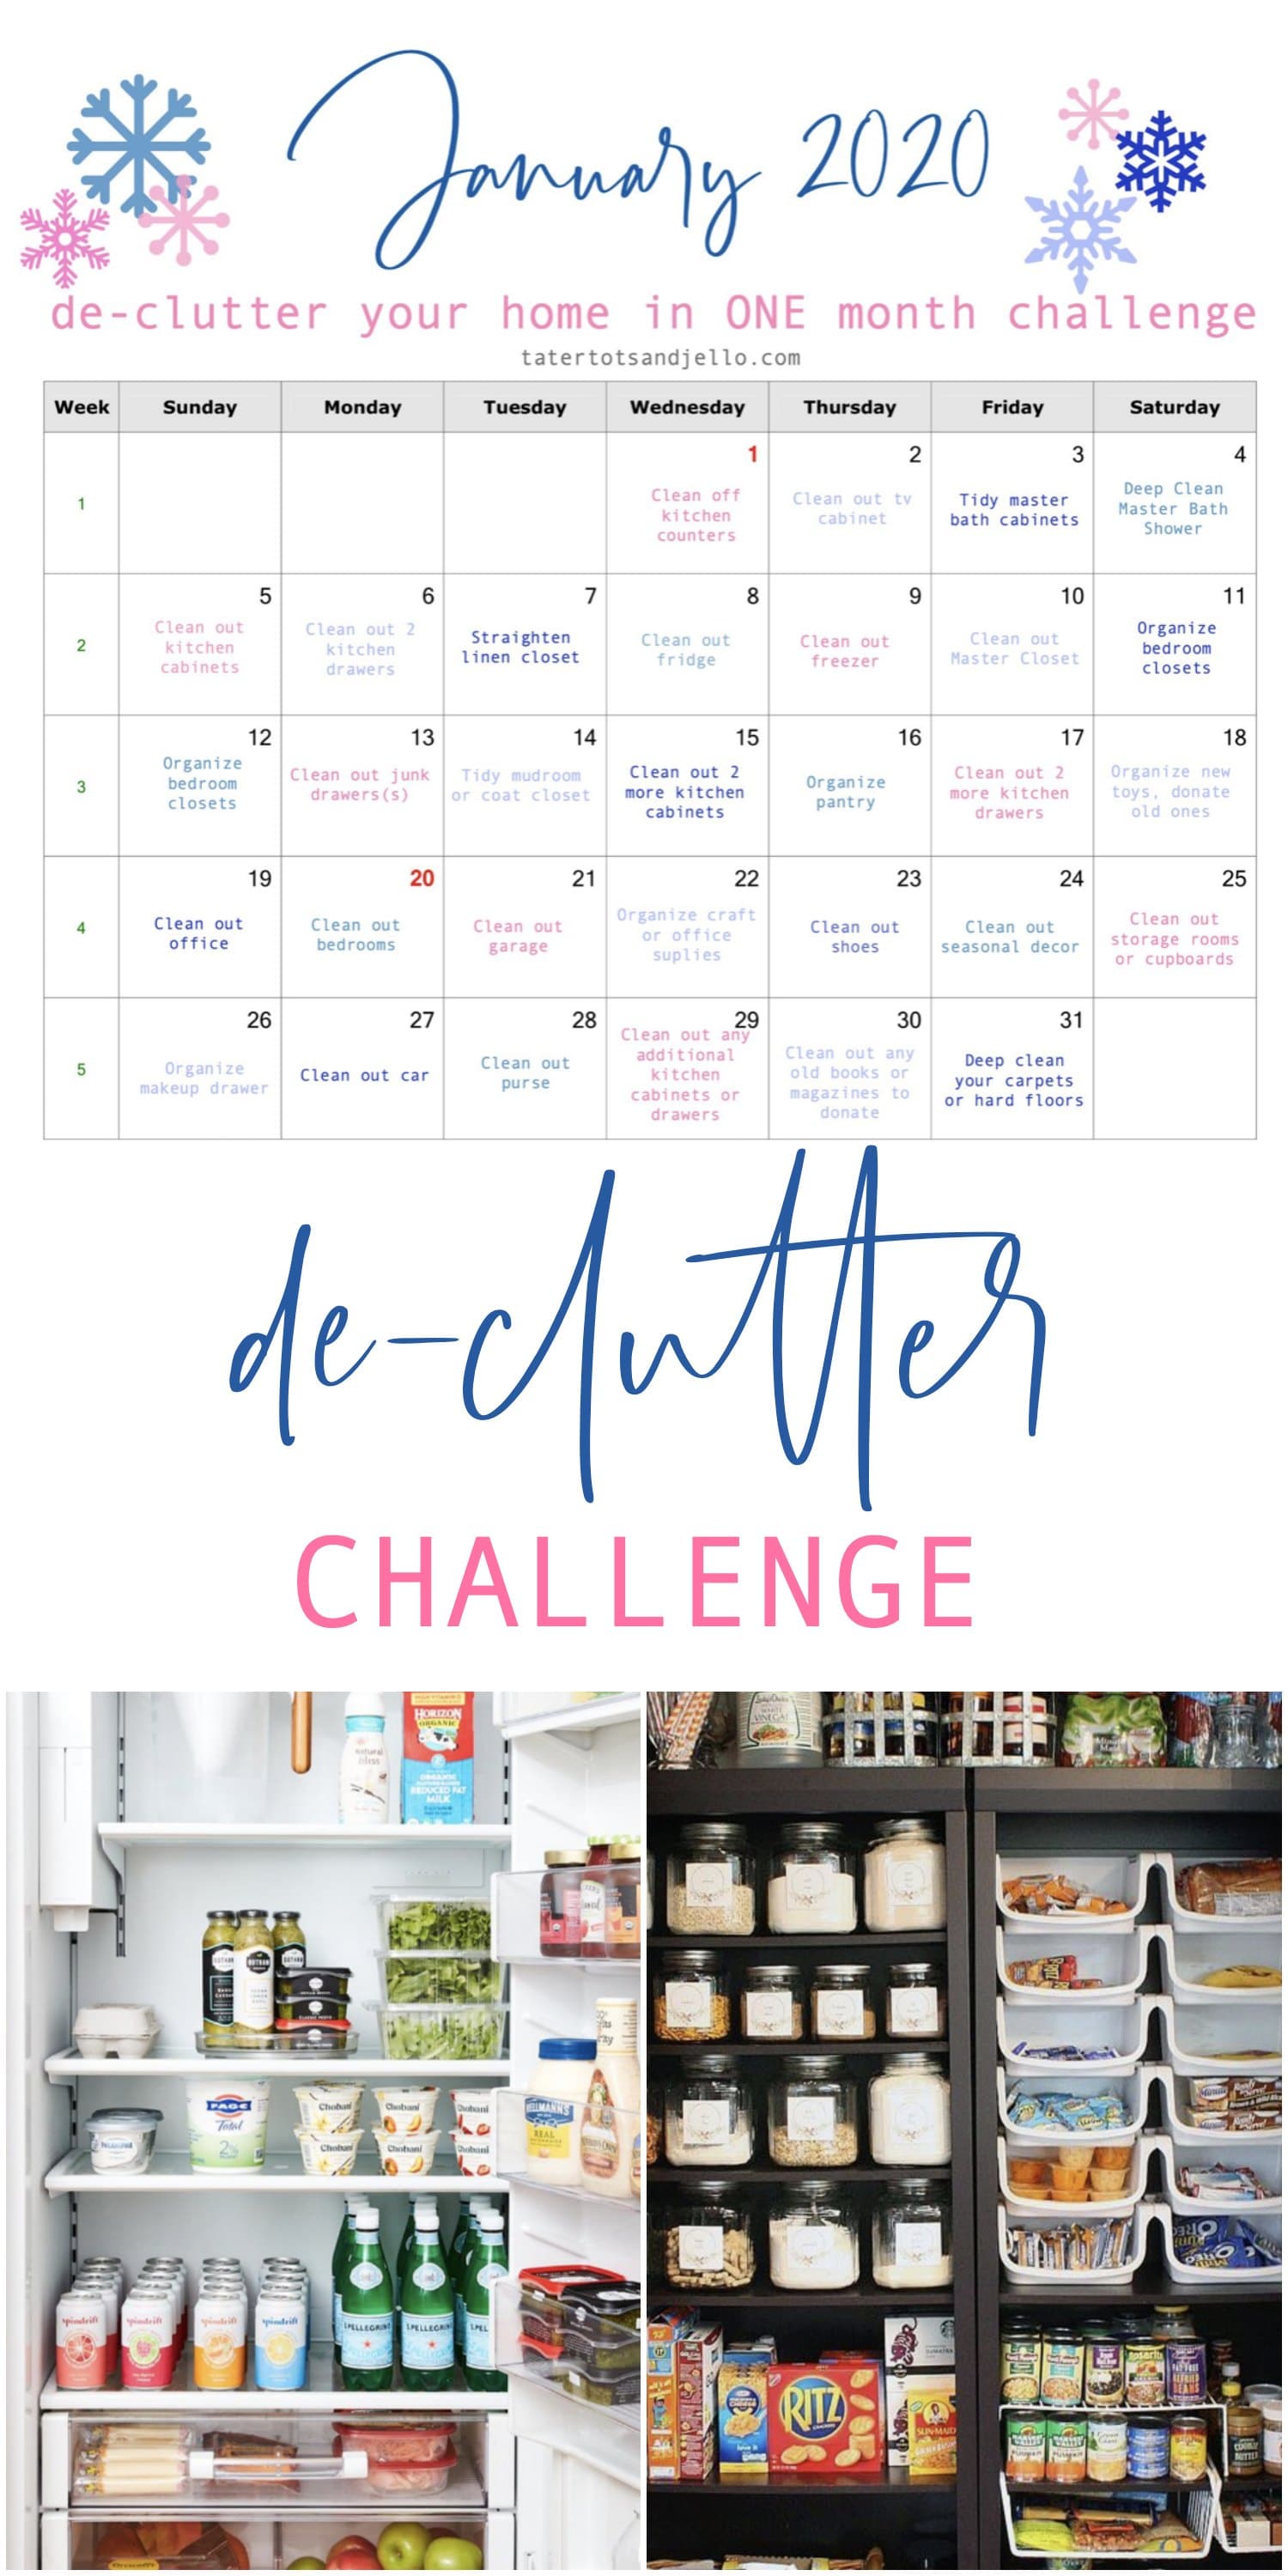 January 2020 Organization Challenge with free printable calendar! Organize your home, one space at a time, and have it all done in ONE month. ﻿